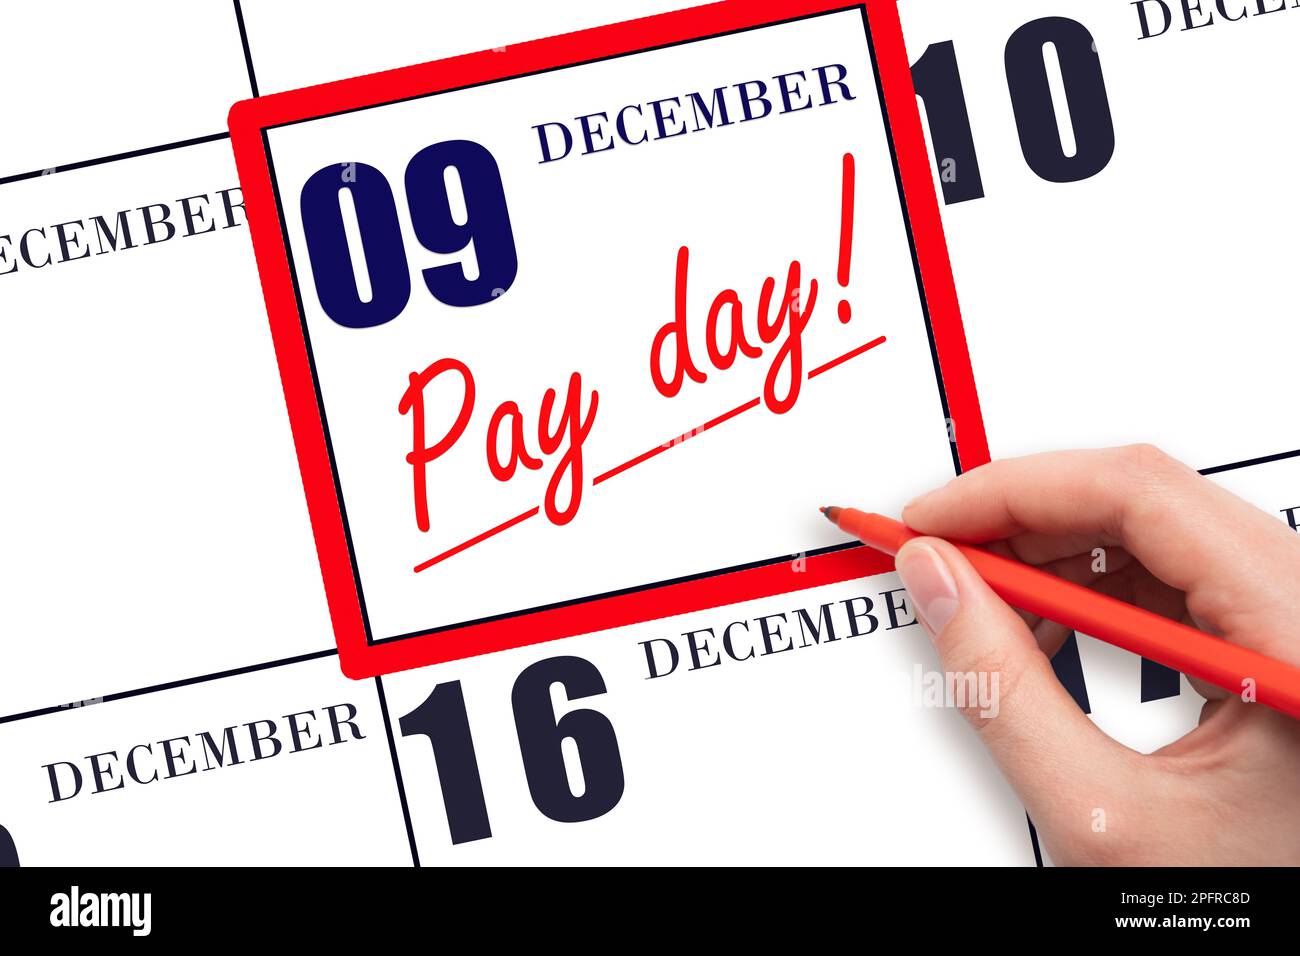 9th day of December. Hand writing text PAY DATE on calendar date December 9 and underline it. Payment due date.  Reminder concept of payment. Winter m Stock Photo